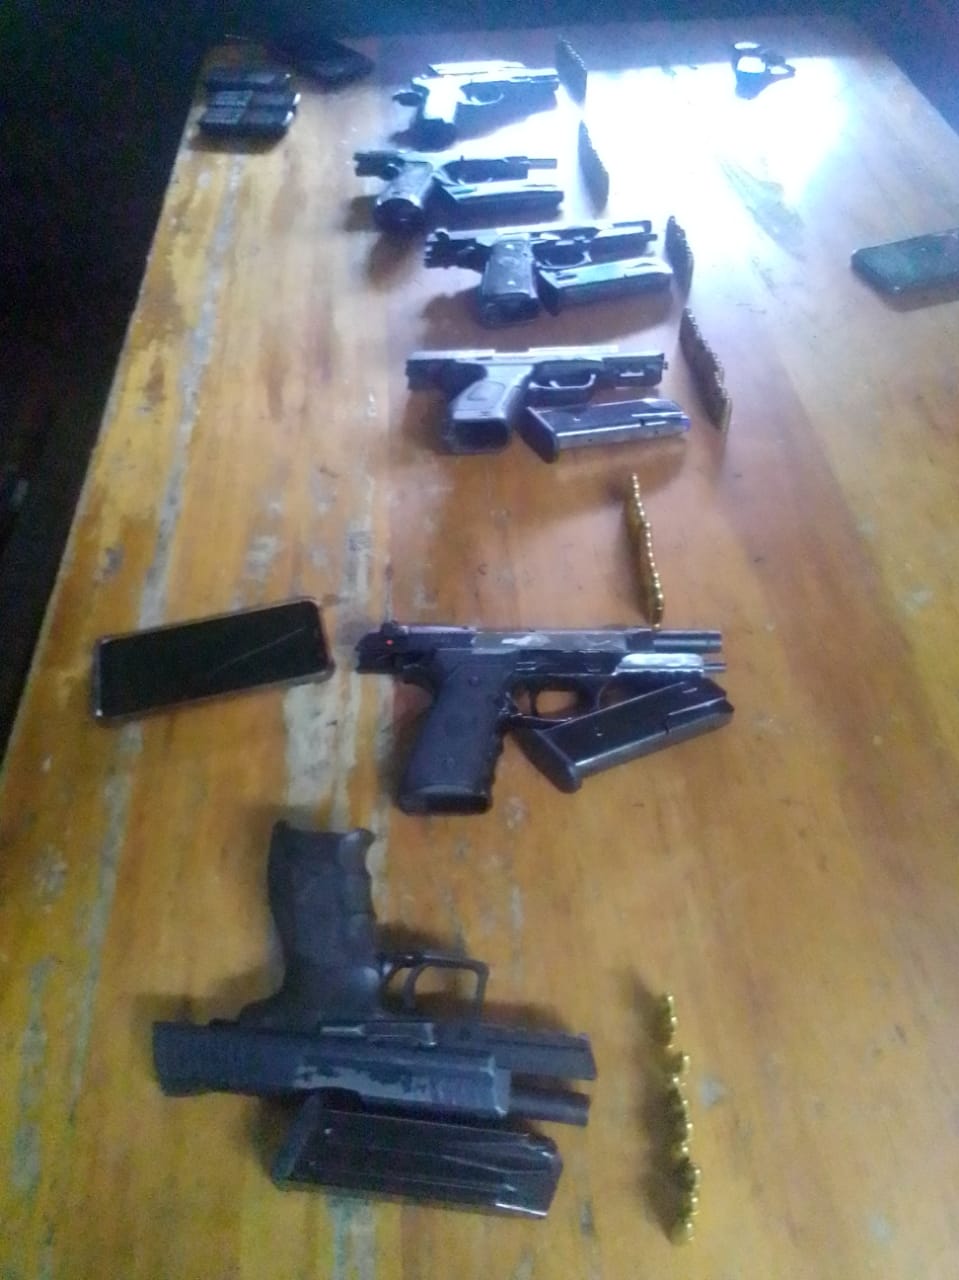 GAUTENG police recover more than 40 illegal firearms and 480 ammunition